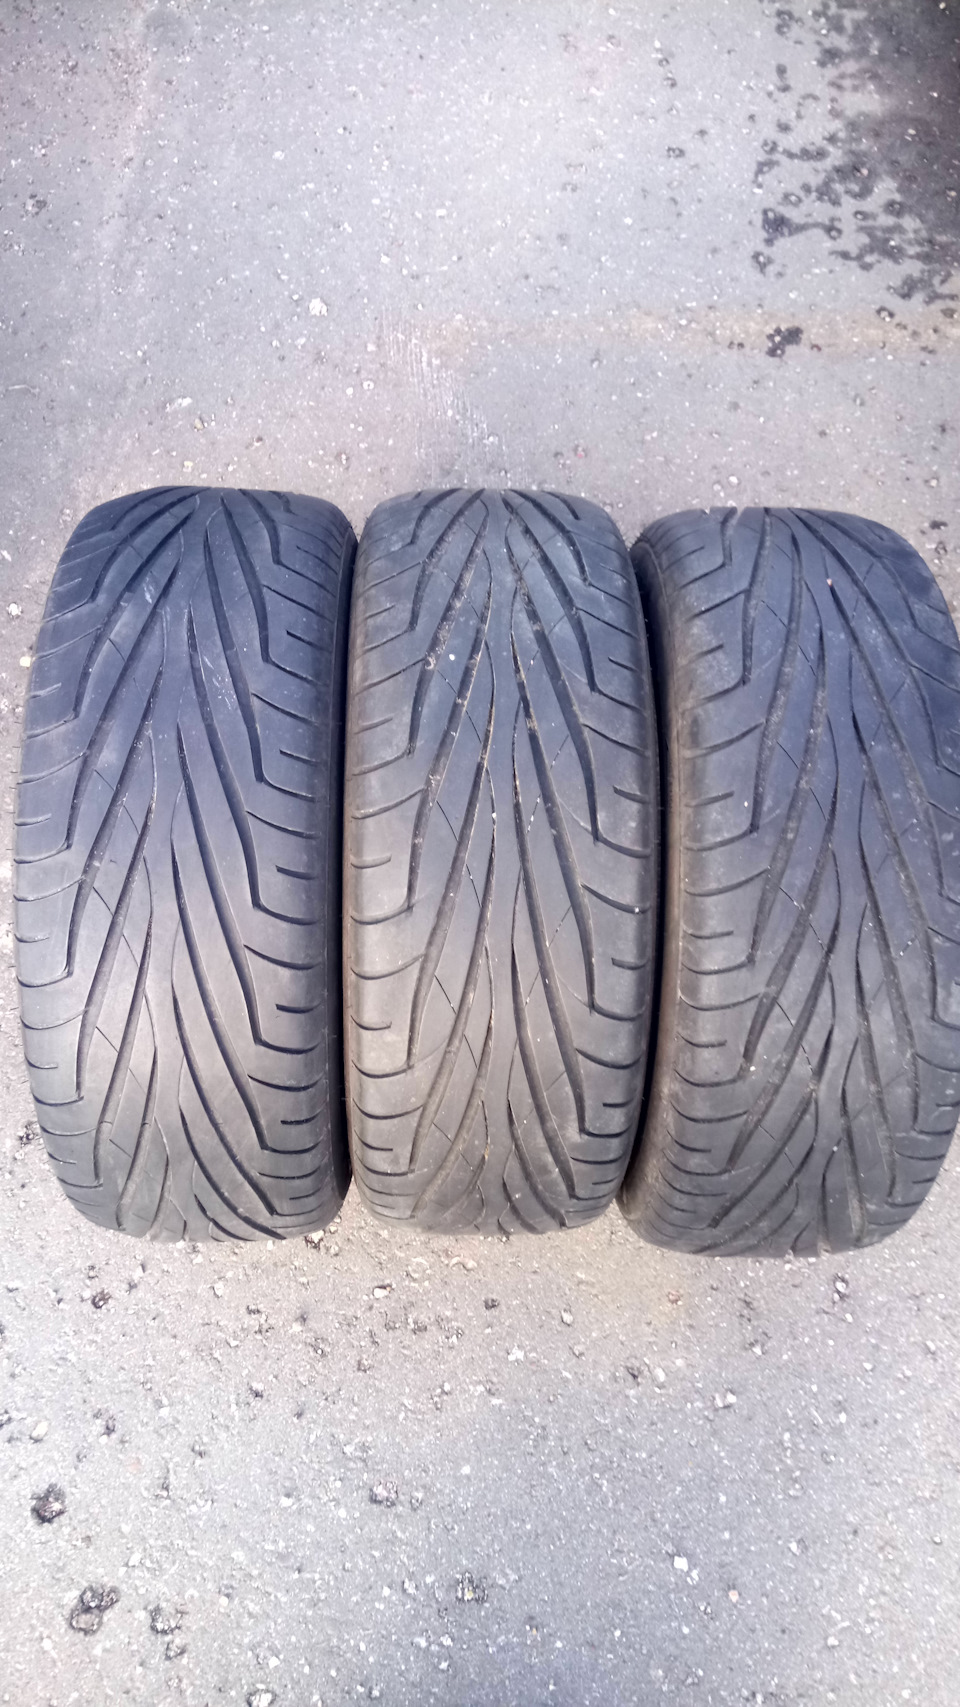 Шины максис виктра. Maxxis ma-z1 Victra. Maxxis ma-z1 Victra 195/50 r15. Авторезина Maxxis Victra ma z1. Максис 205/55/16 лето МЗ 1.